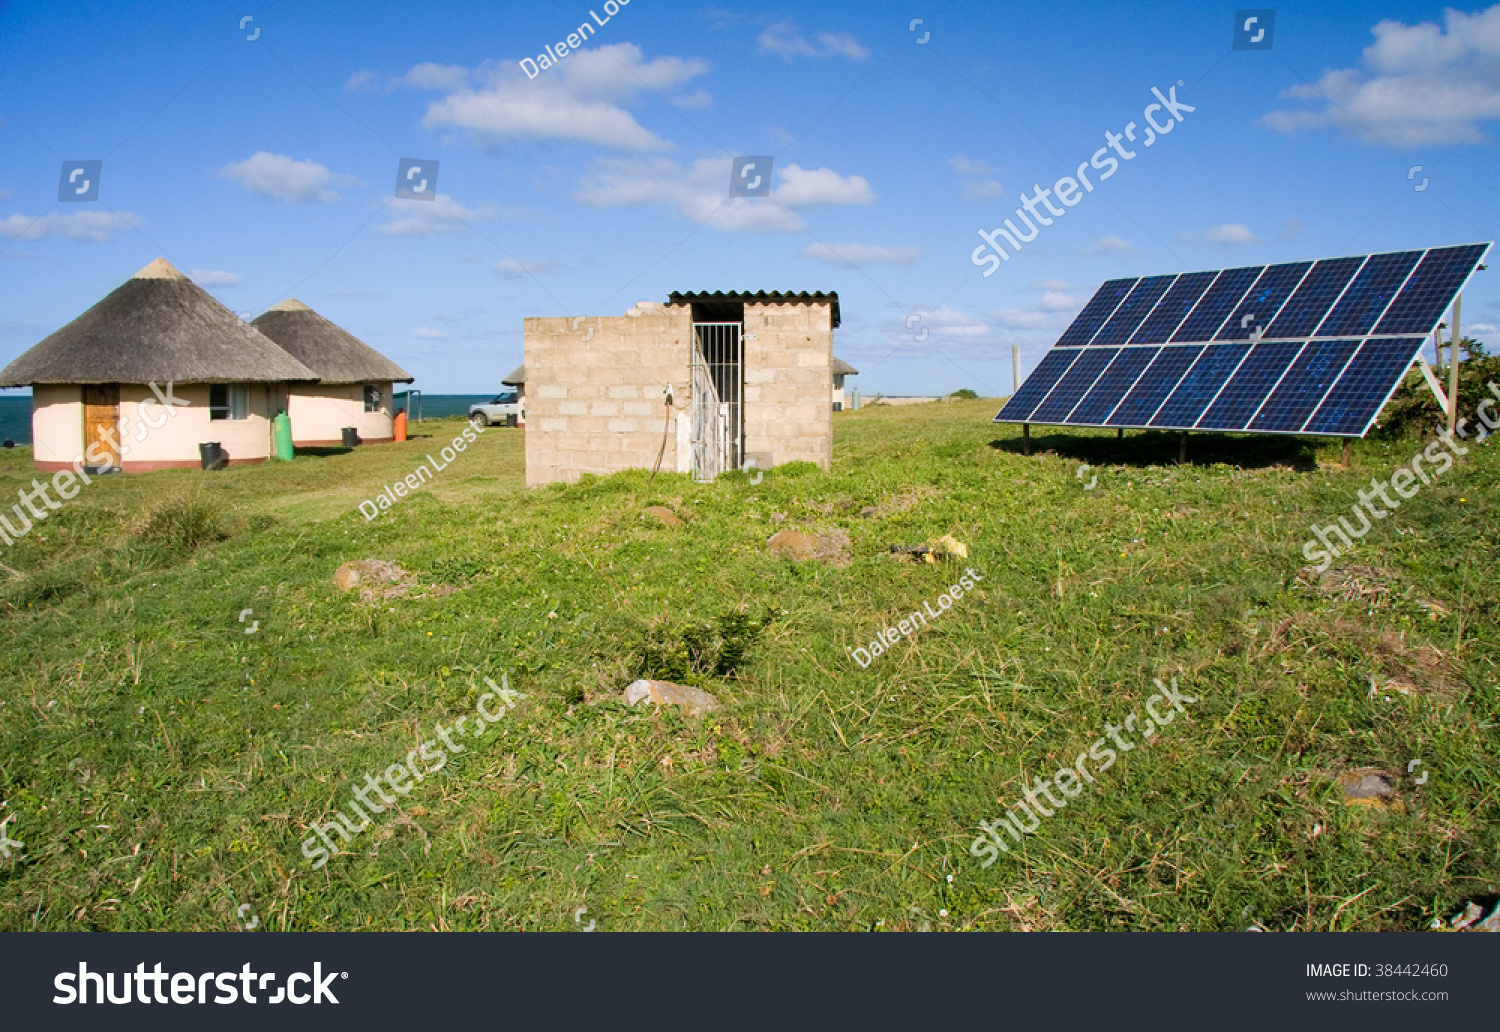 Solar Panel Providing Power To A Rural Area In Africa Stock Photo